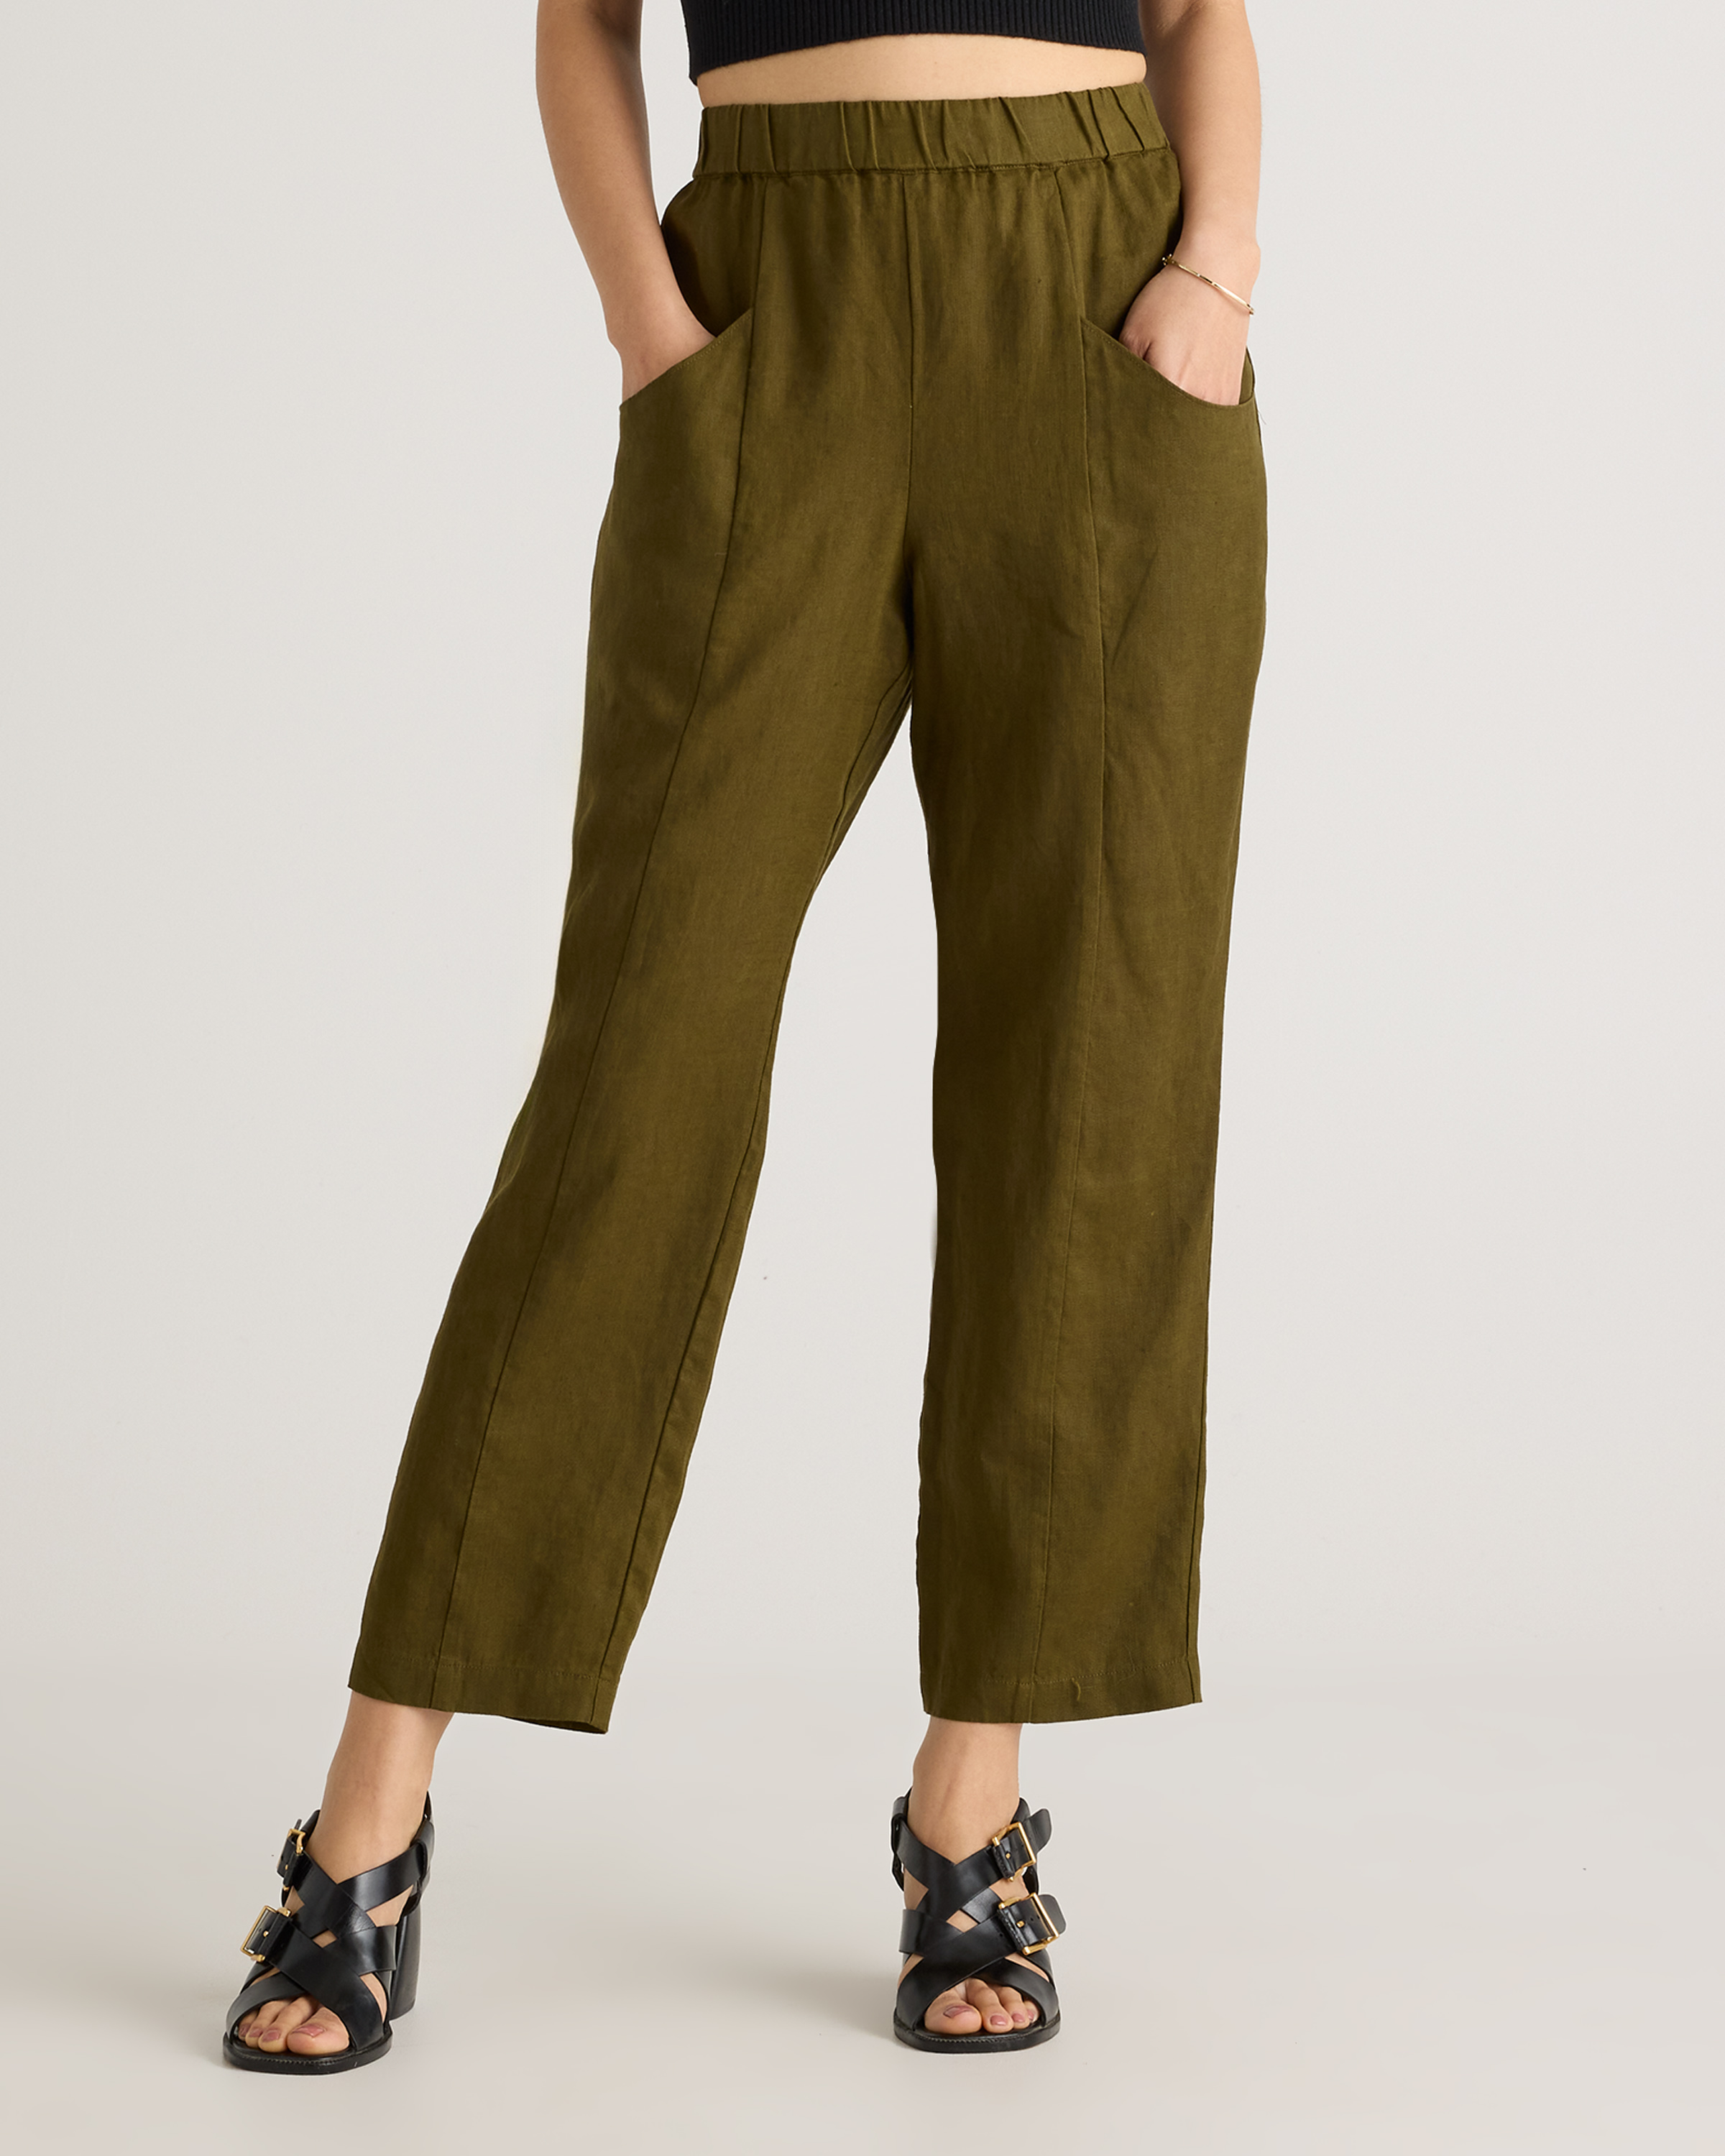 Shop Quince Women's 100% European Linen Tapered Ankle Pants In Martini Olive